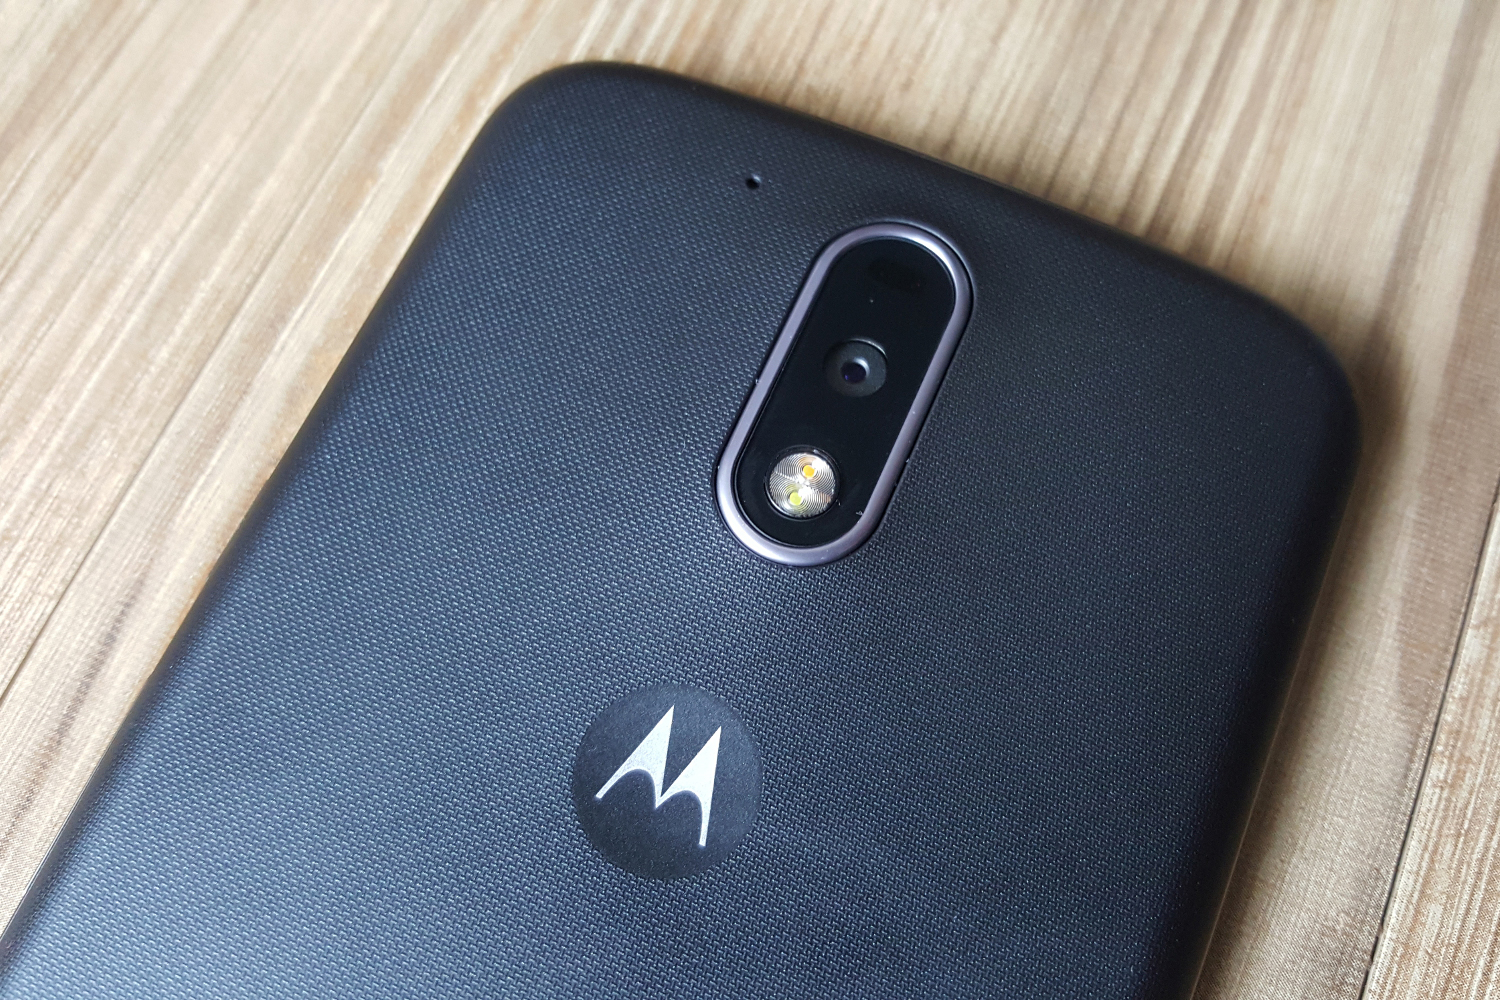 Review: Without quick updates the Moto G4 is merely good, not great